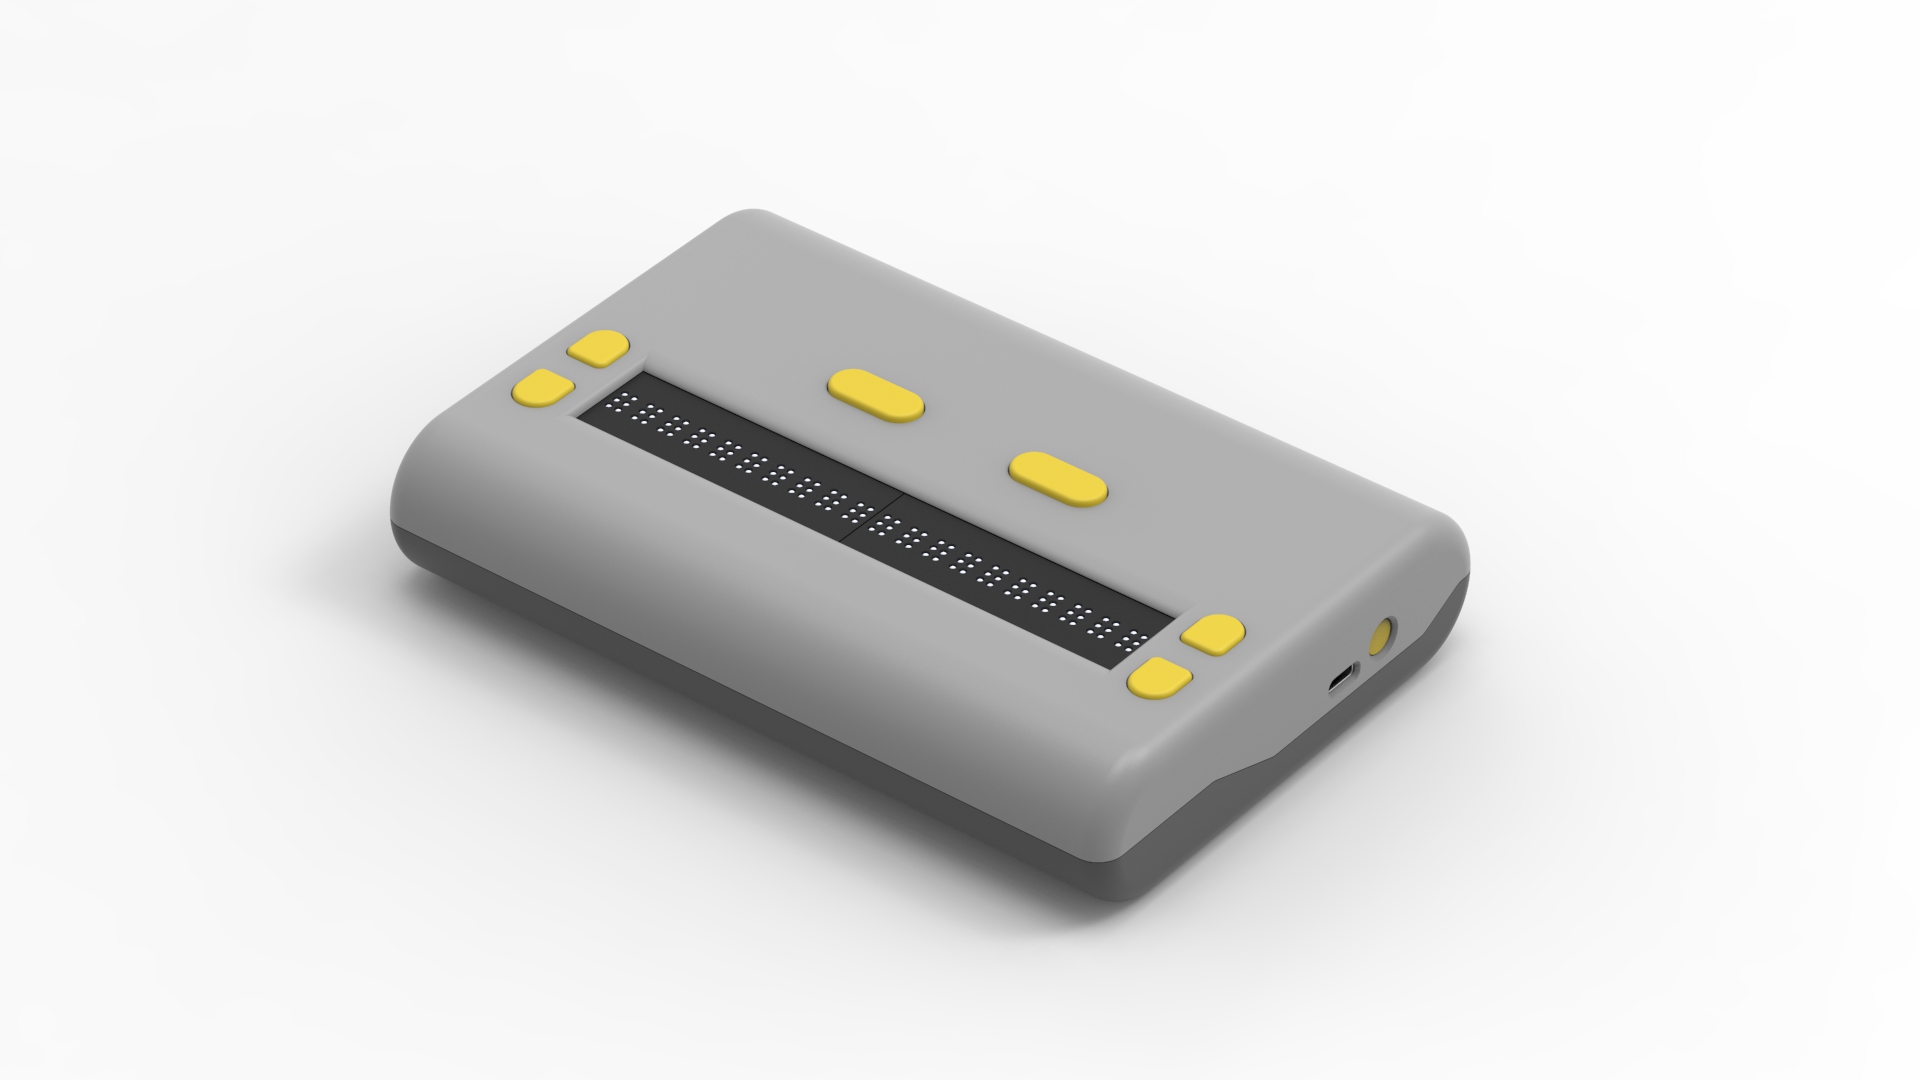 The refreshable Braille device made by Phoenix